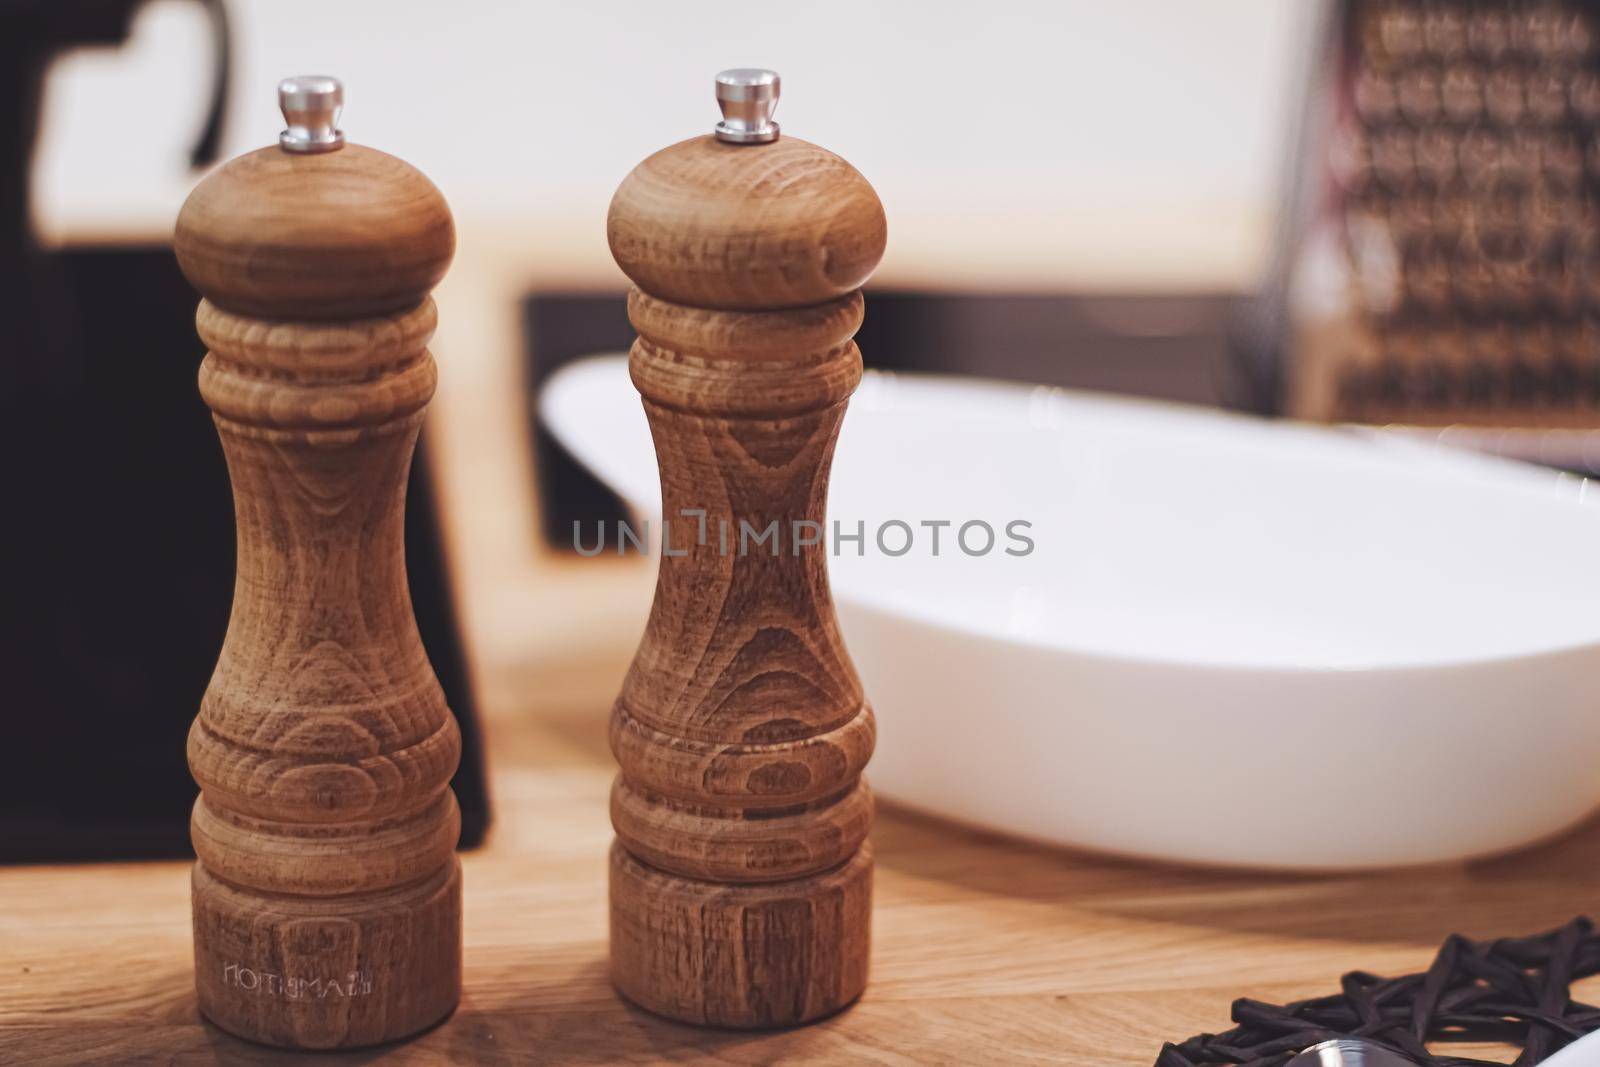 Wooden salt and pepper shaker set in the kitchen, eco-friendly product and home decor idea